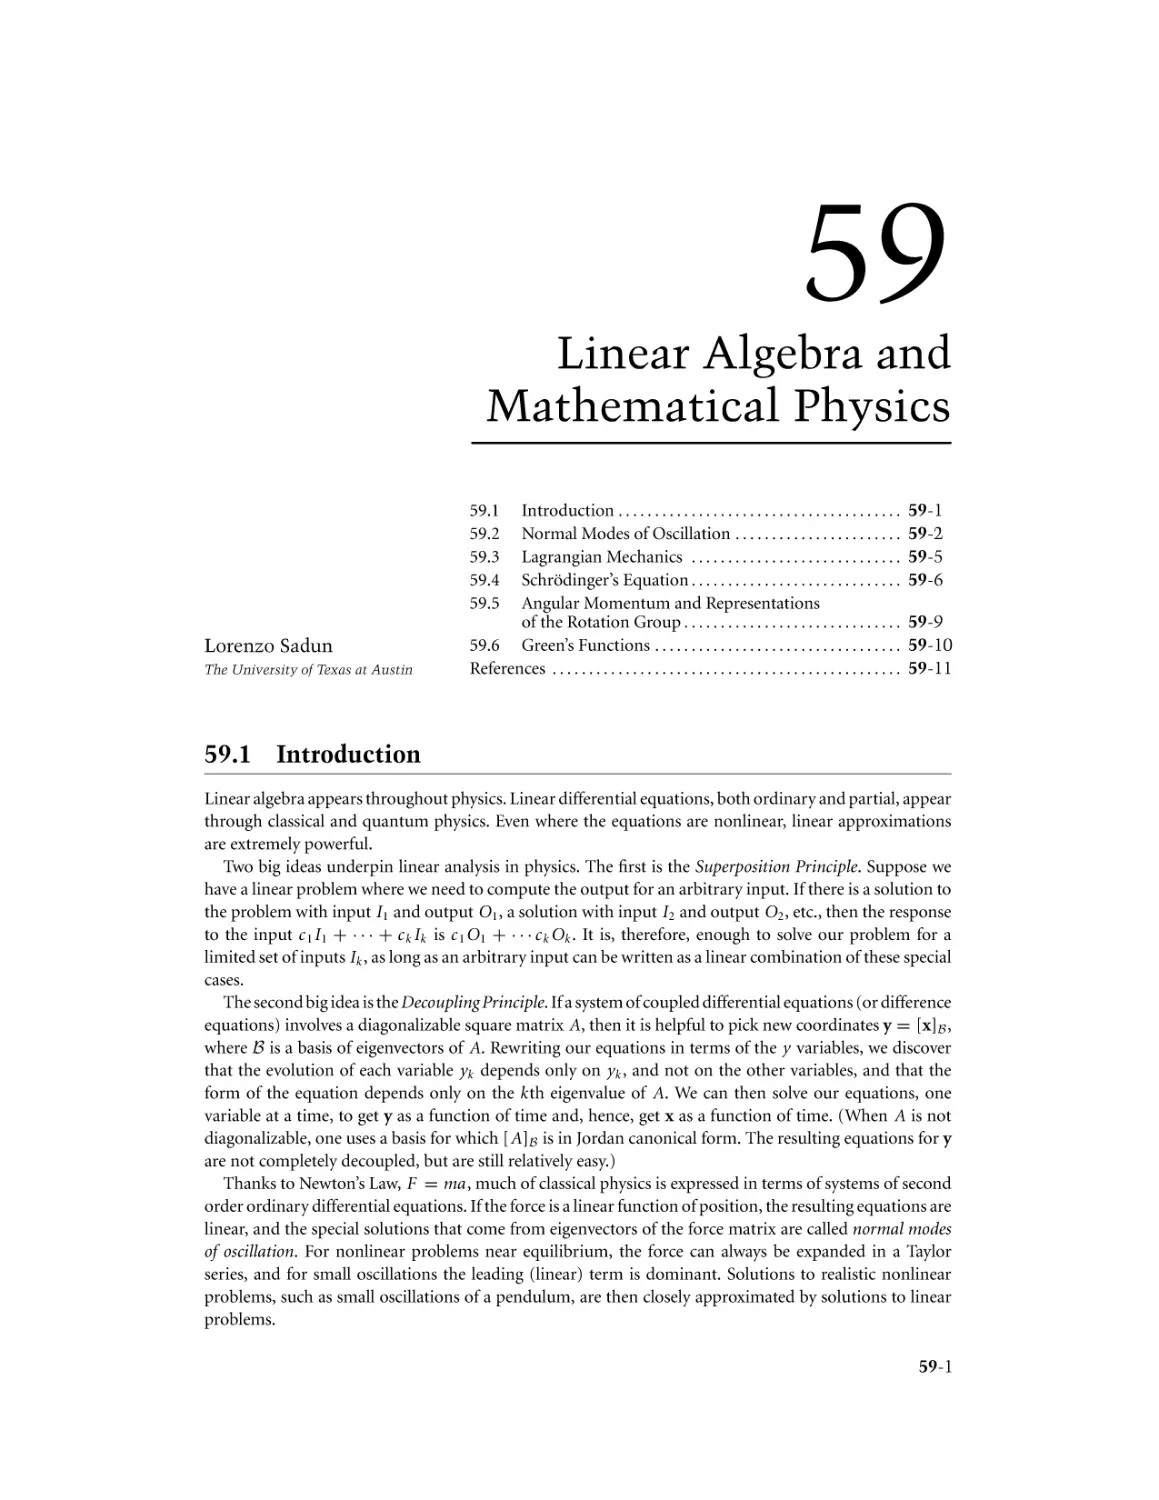 Chapter 59. Linear Algebra and Mathematical Physics